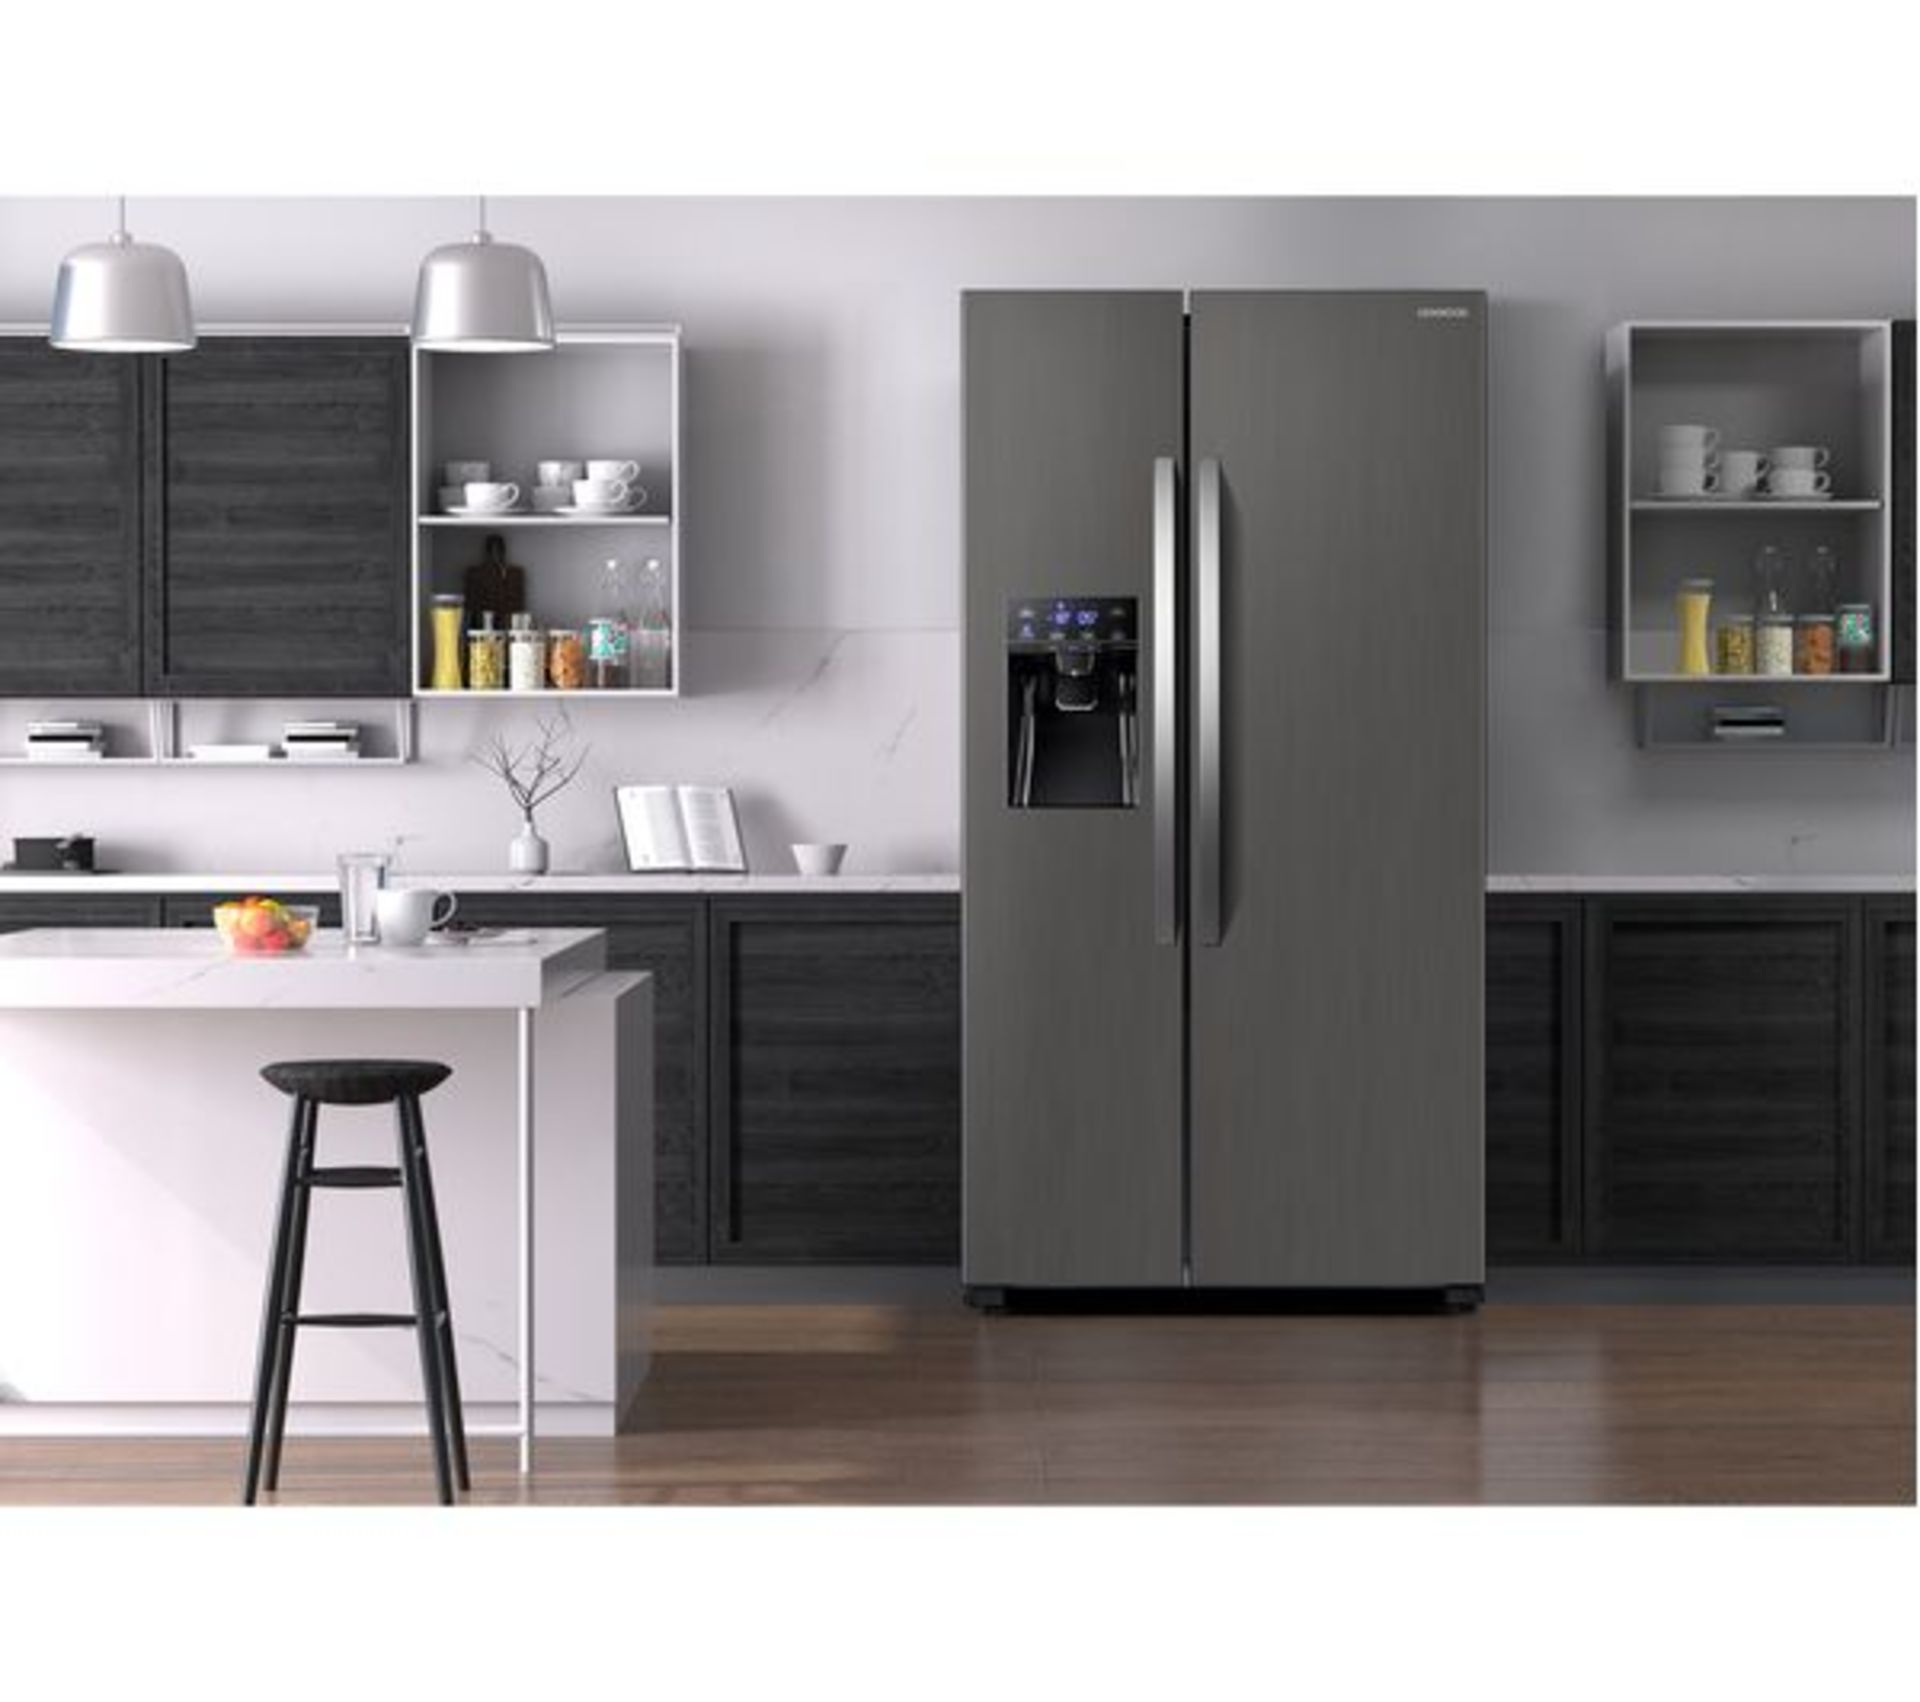 1 x Kenwood KSBSDiX20 Stainless Steel American Style Fridge Freezer With Water and Ice Dispenser - Image 8 of 8